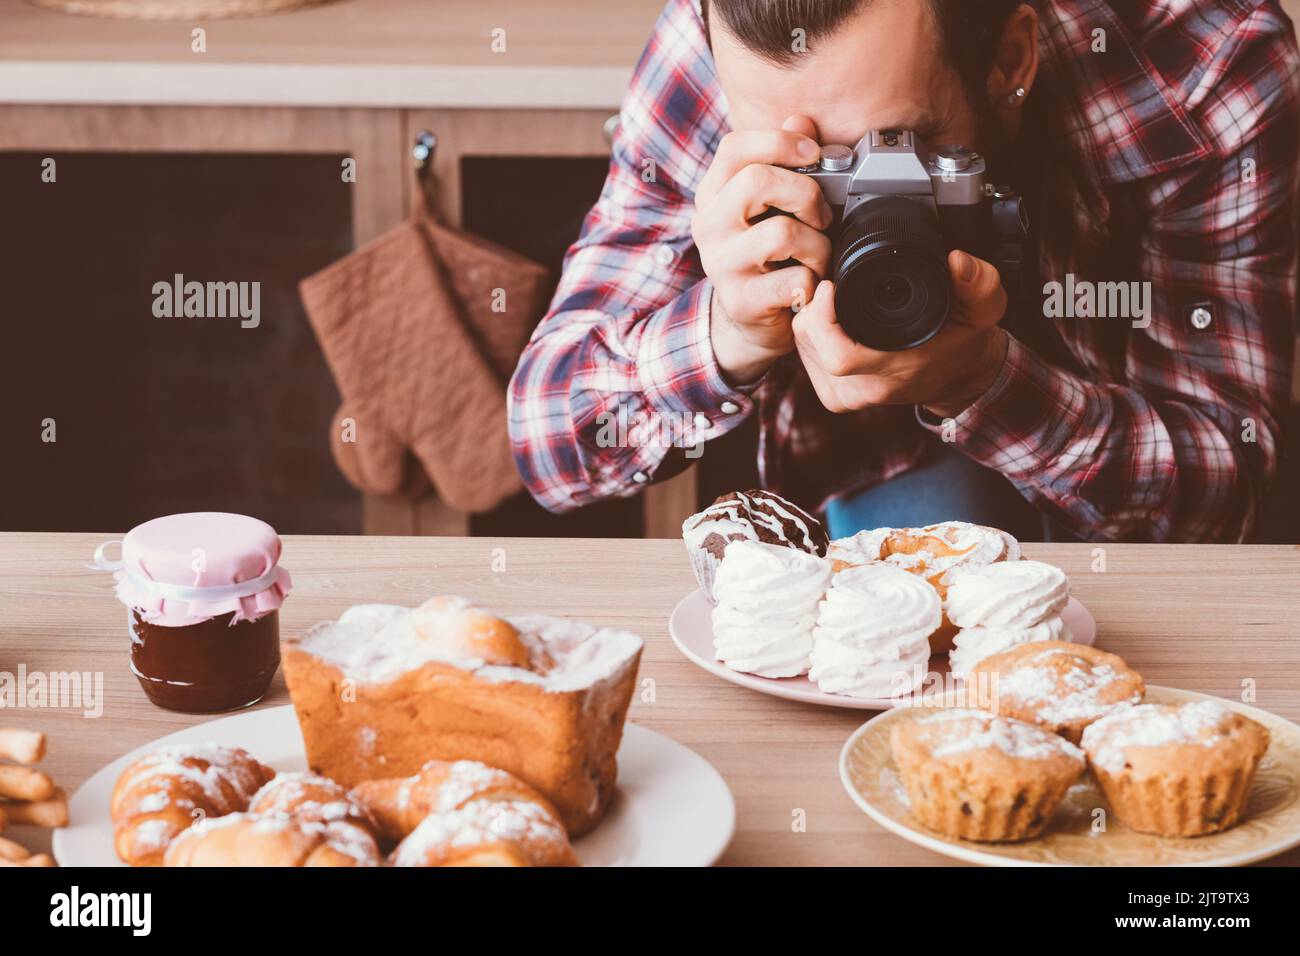 food photography homemade sweet bakery pastries Stock Photo